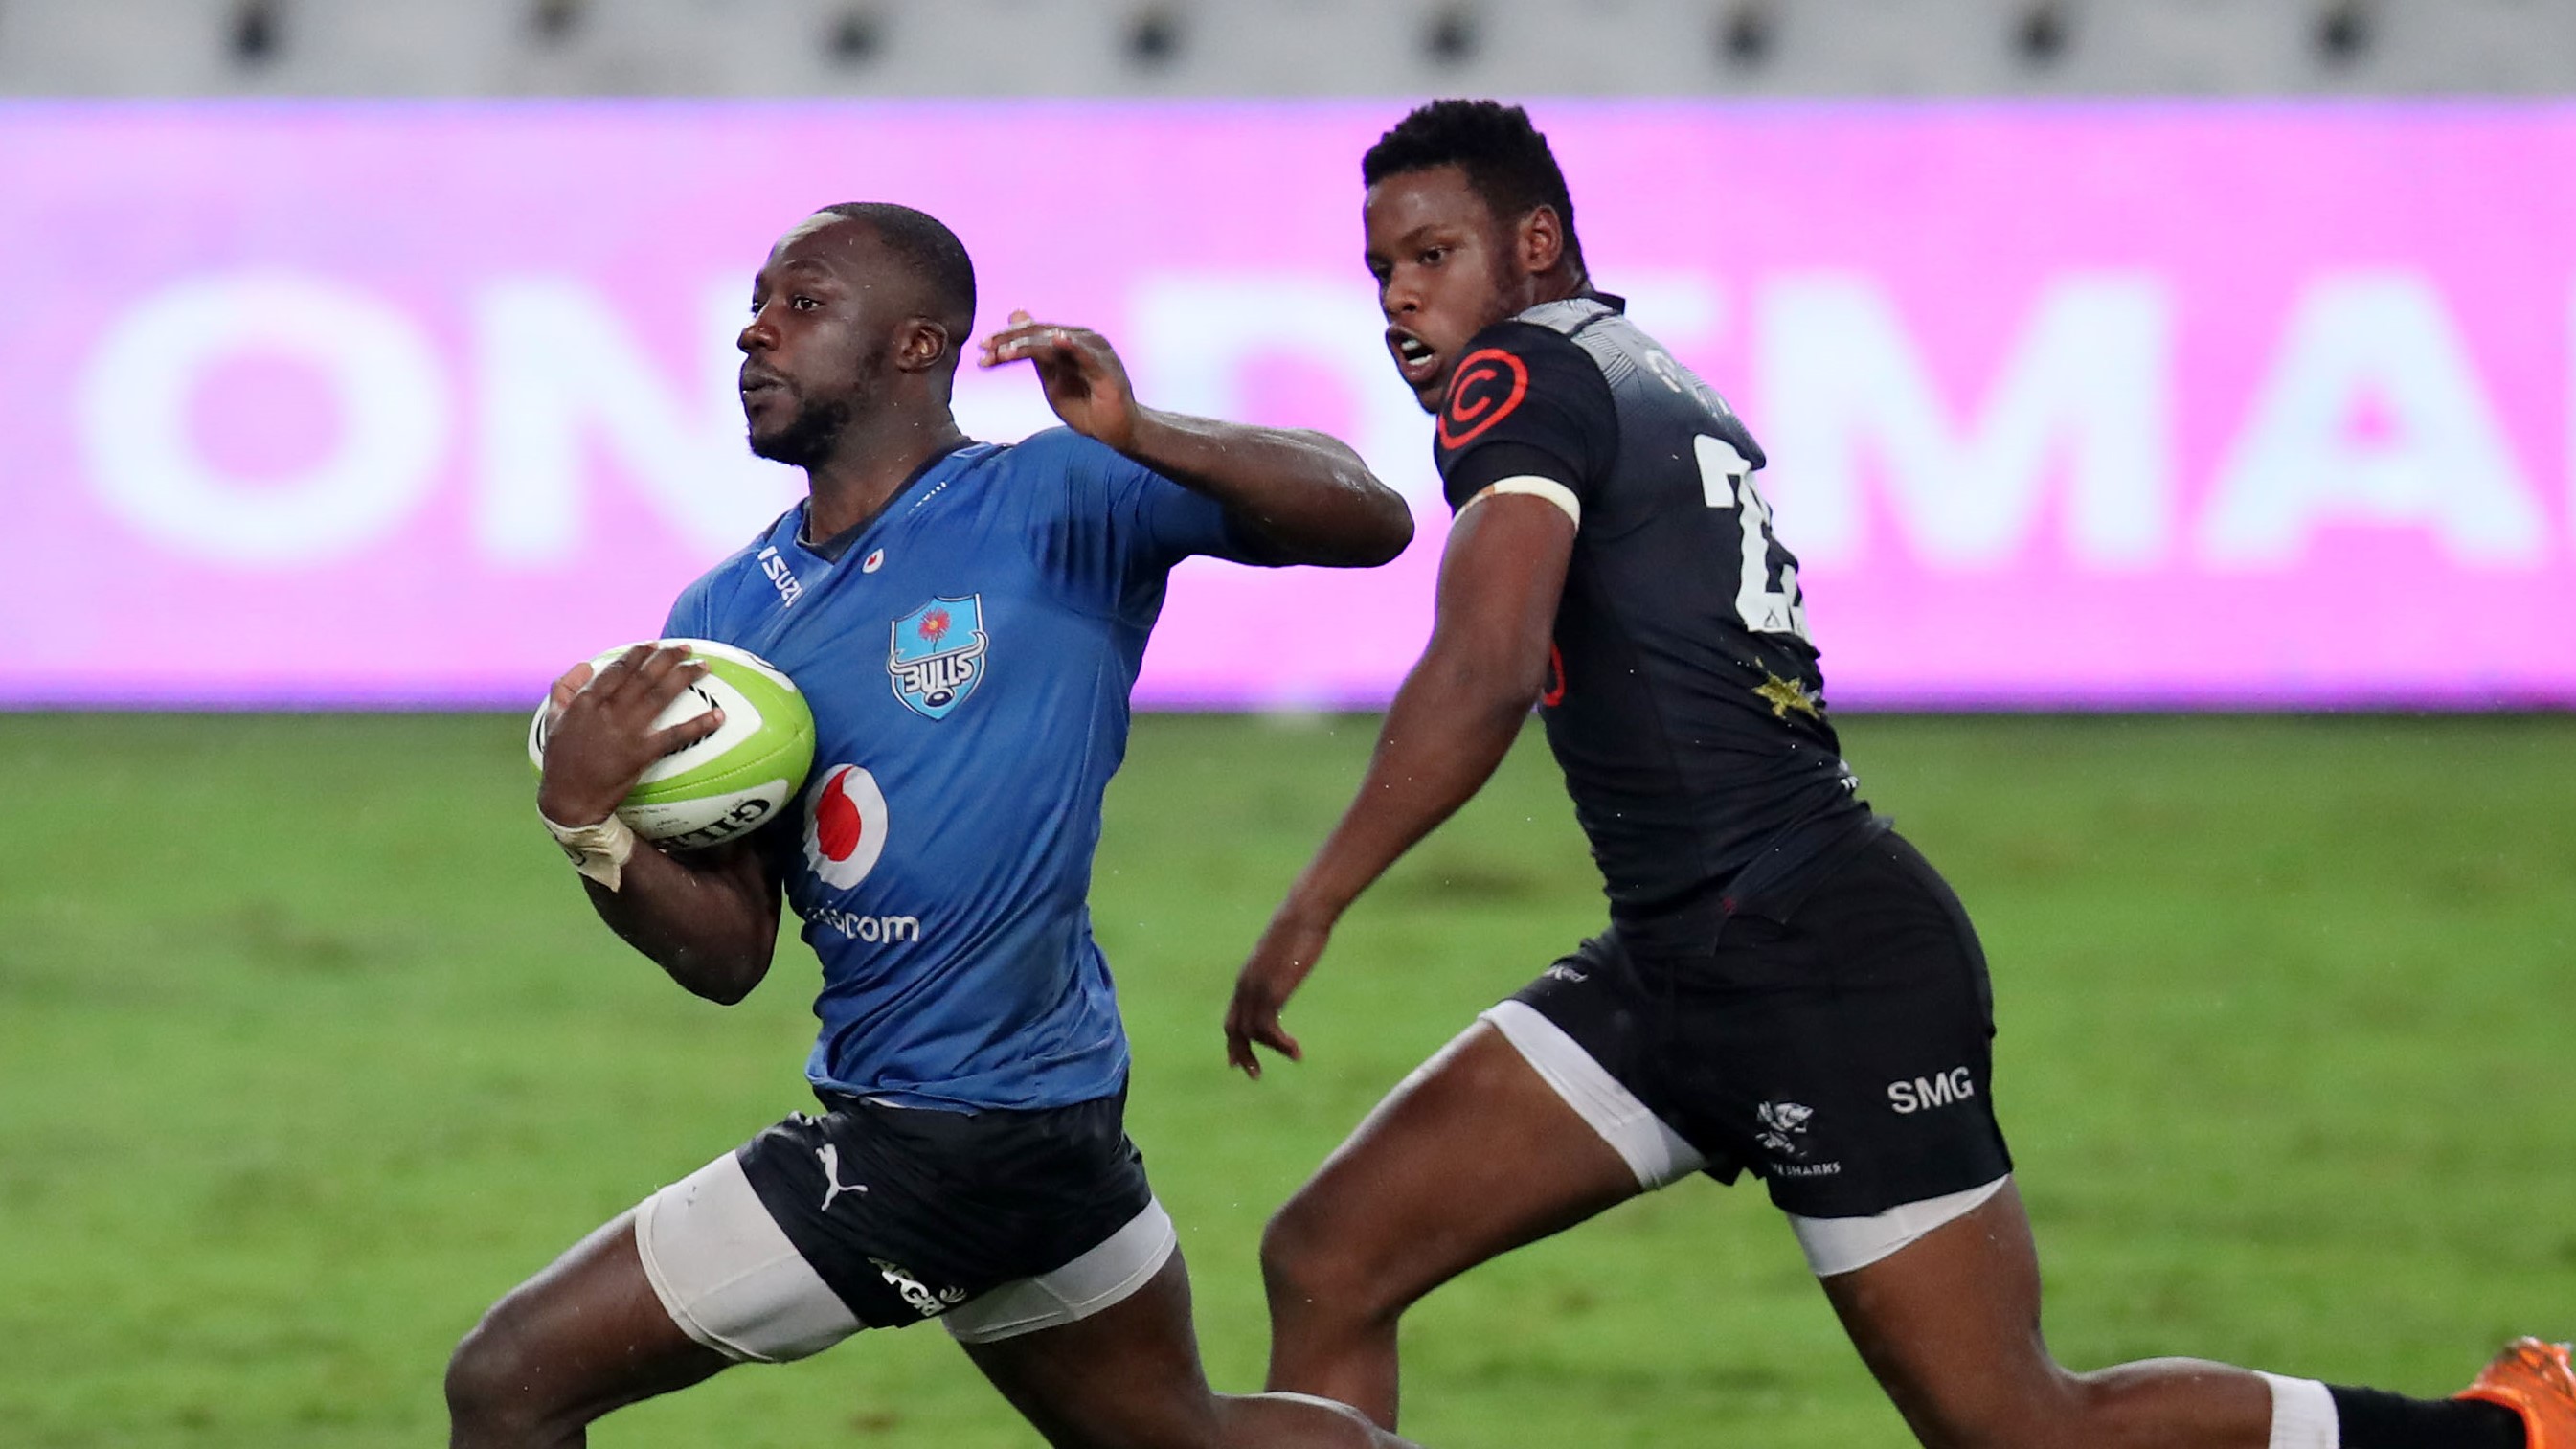 Madosh Tambwe of the Bulls challenged by Aphelele Fassi of the Sharks during the 2021 Preparation Series match between Sharks and Bulls at the Jonsson Kings Park in Durban on 26 March 2021 ©Muzi Ntombela/BackpagePix